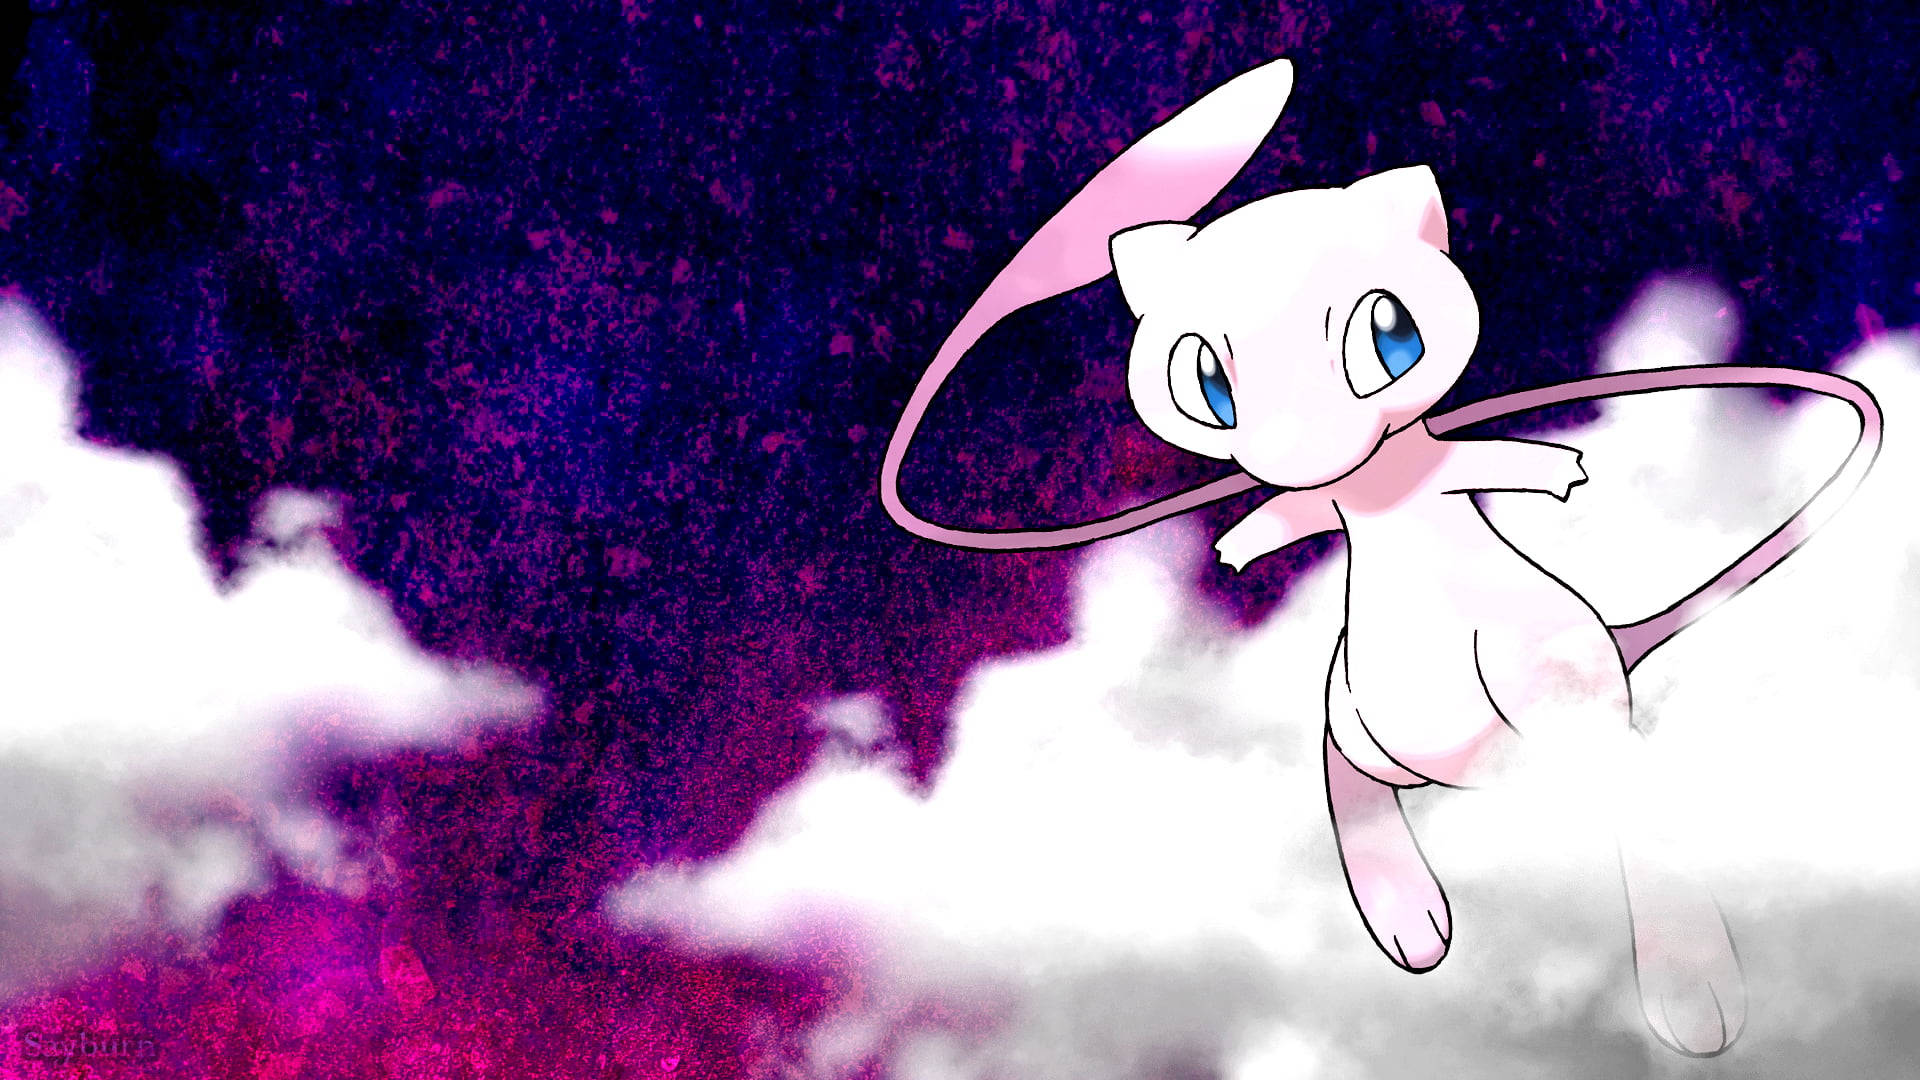 'a Creature From The Heavens: Mew In A Dreamy Cloudy Sky' Background